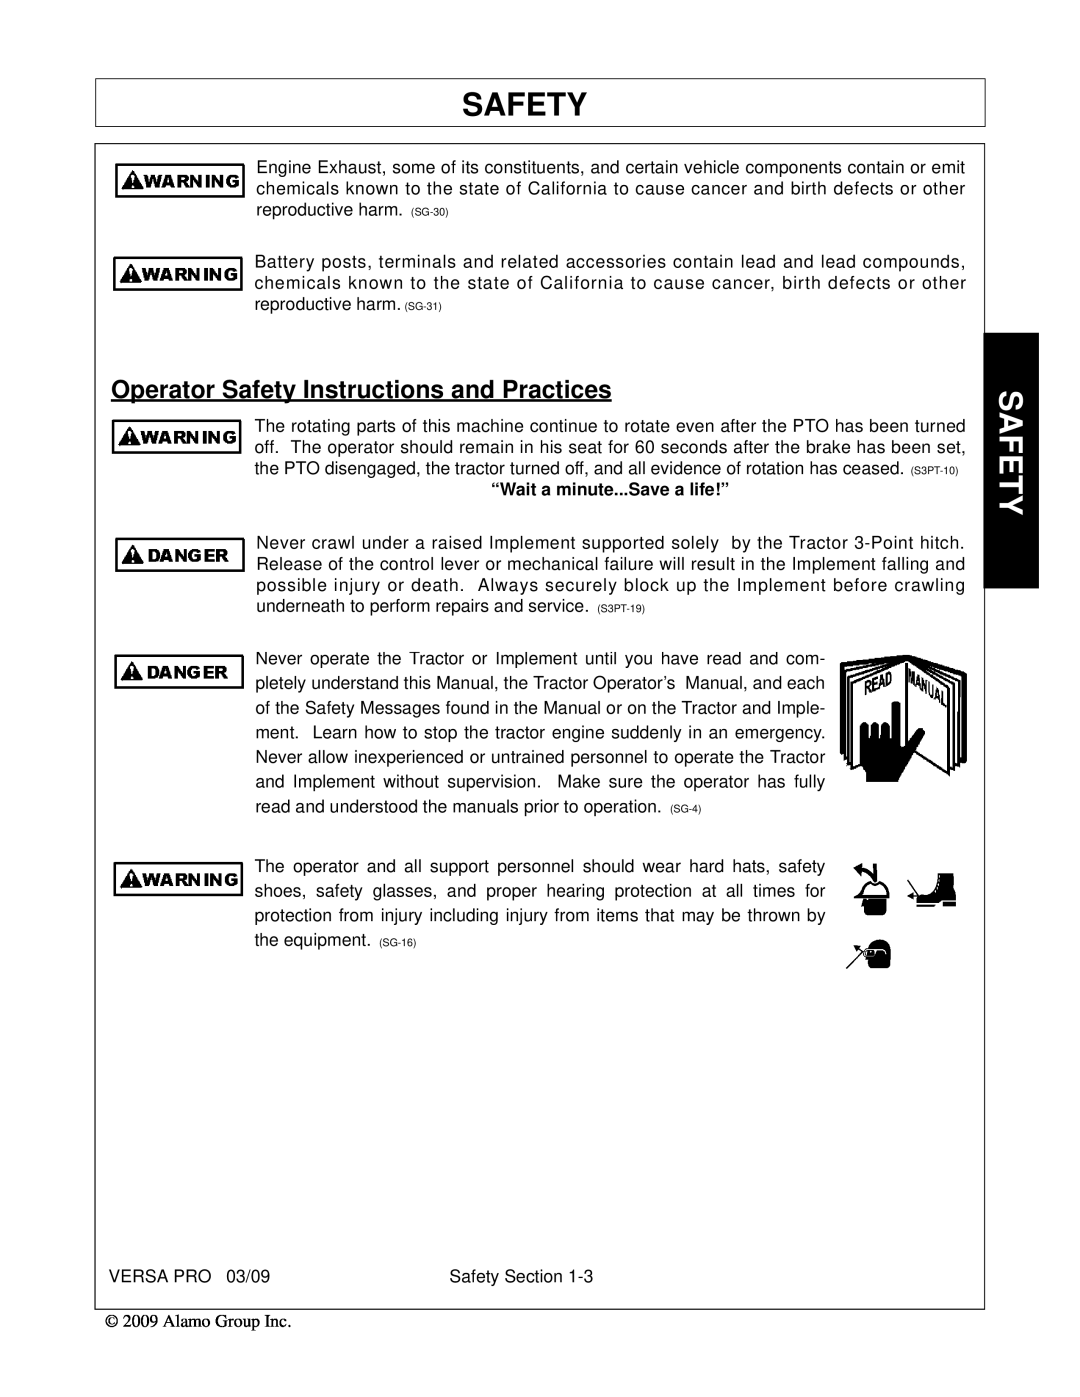 Alamo 803350C manual Operator Safety Instructions and Practices, “Wait a minute...Save a life!” 